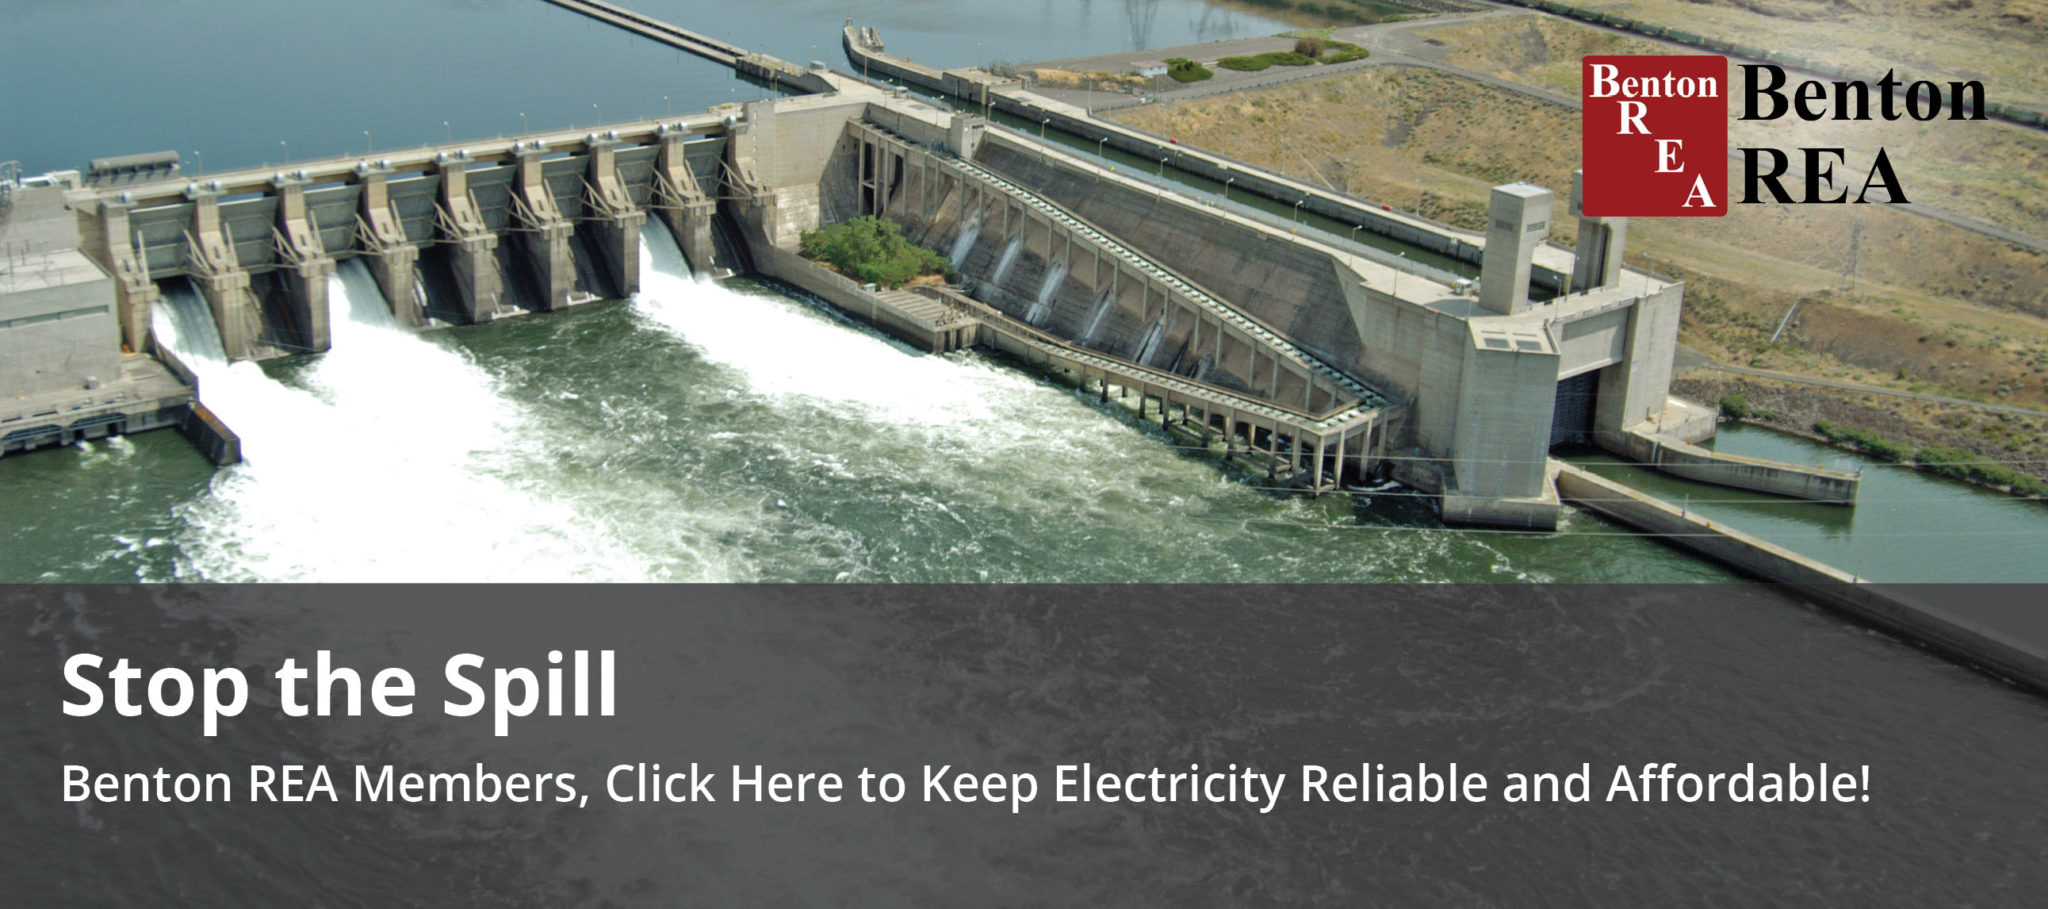 Stop the Spill. Benton REA Members, click here to keep electricity reliable and affordable!